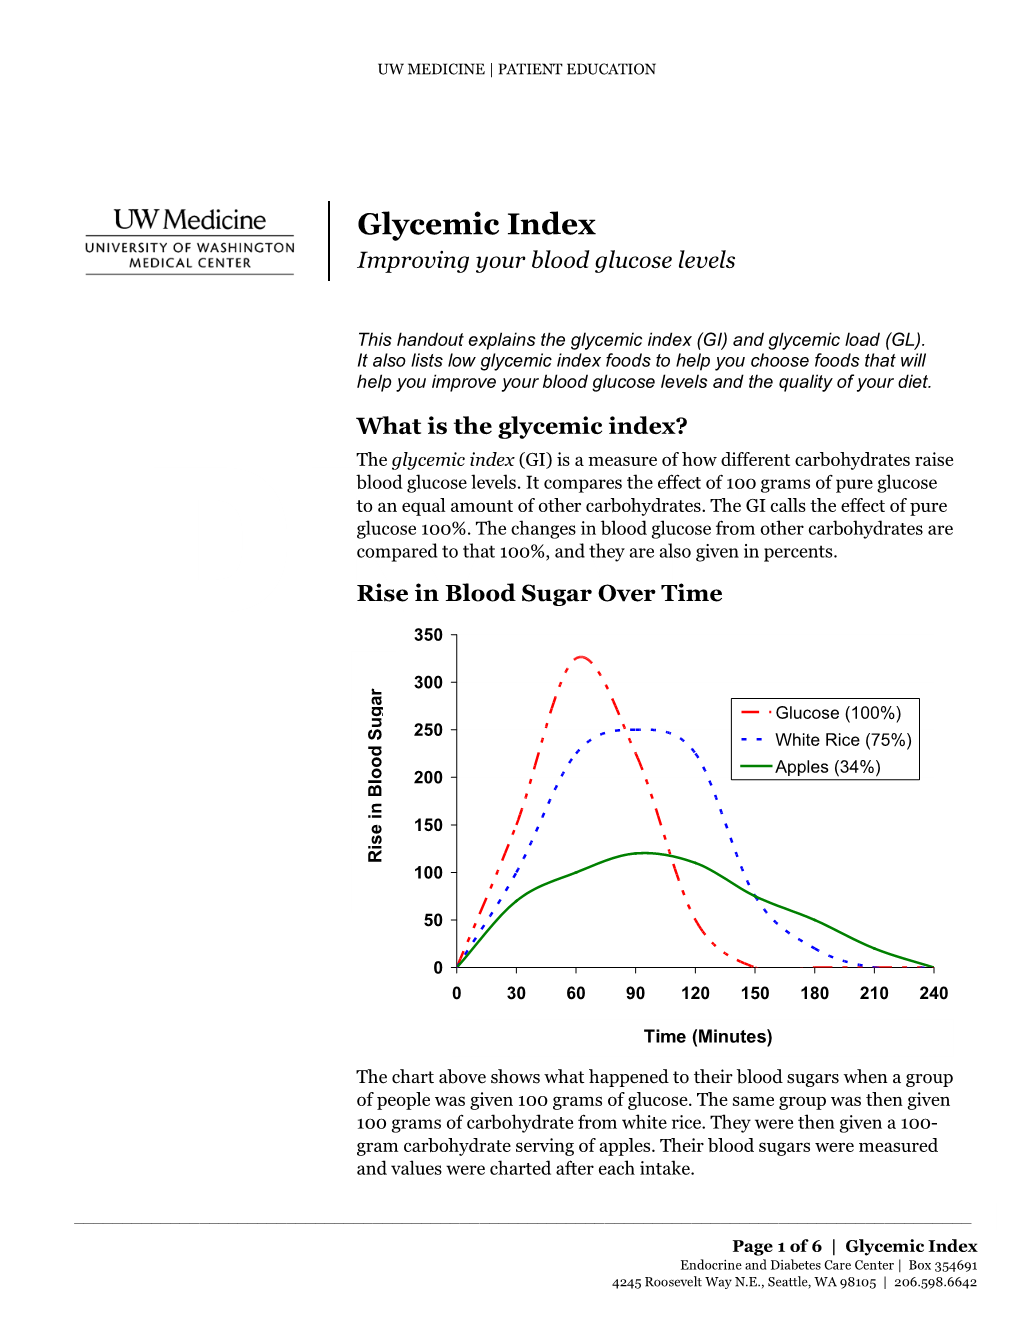 Glycemic Index | Improving Your Blood Glucose Levels |